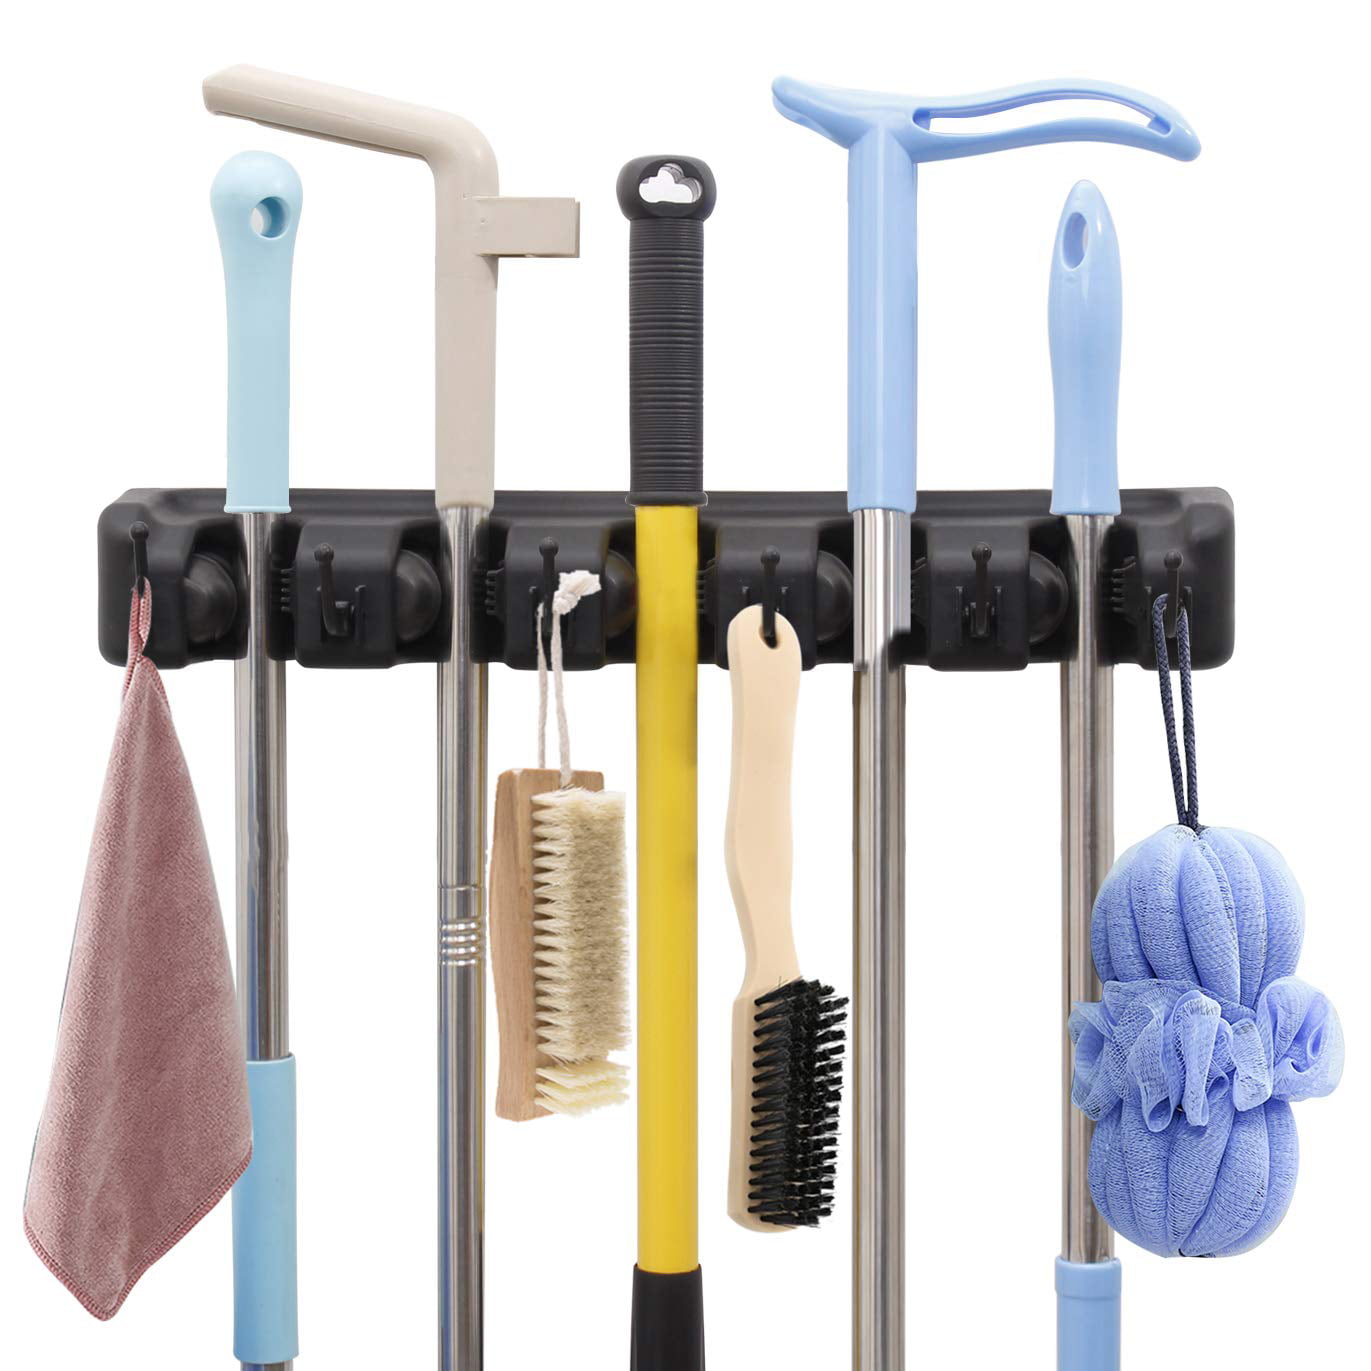 Dust Collector Rake Shovel 6 Foldable Hooks for Smaller Tools Toilet Cleaning Storage Racks Firoya Wall-Mounted Tool Organizer 5 Slots with Automatic Handles are Perfect for Broom Mops